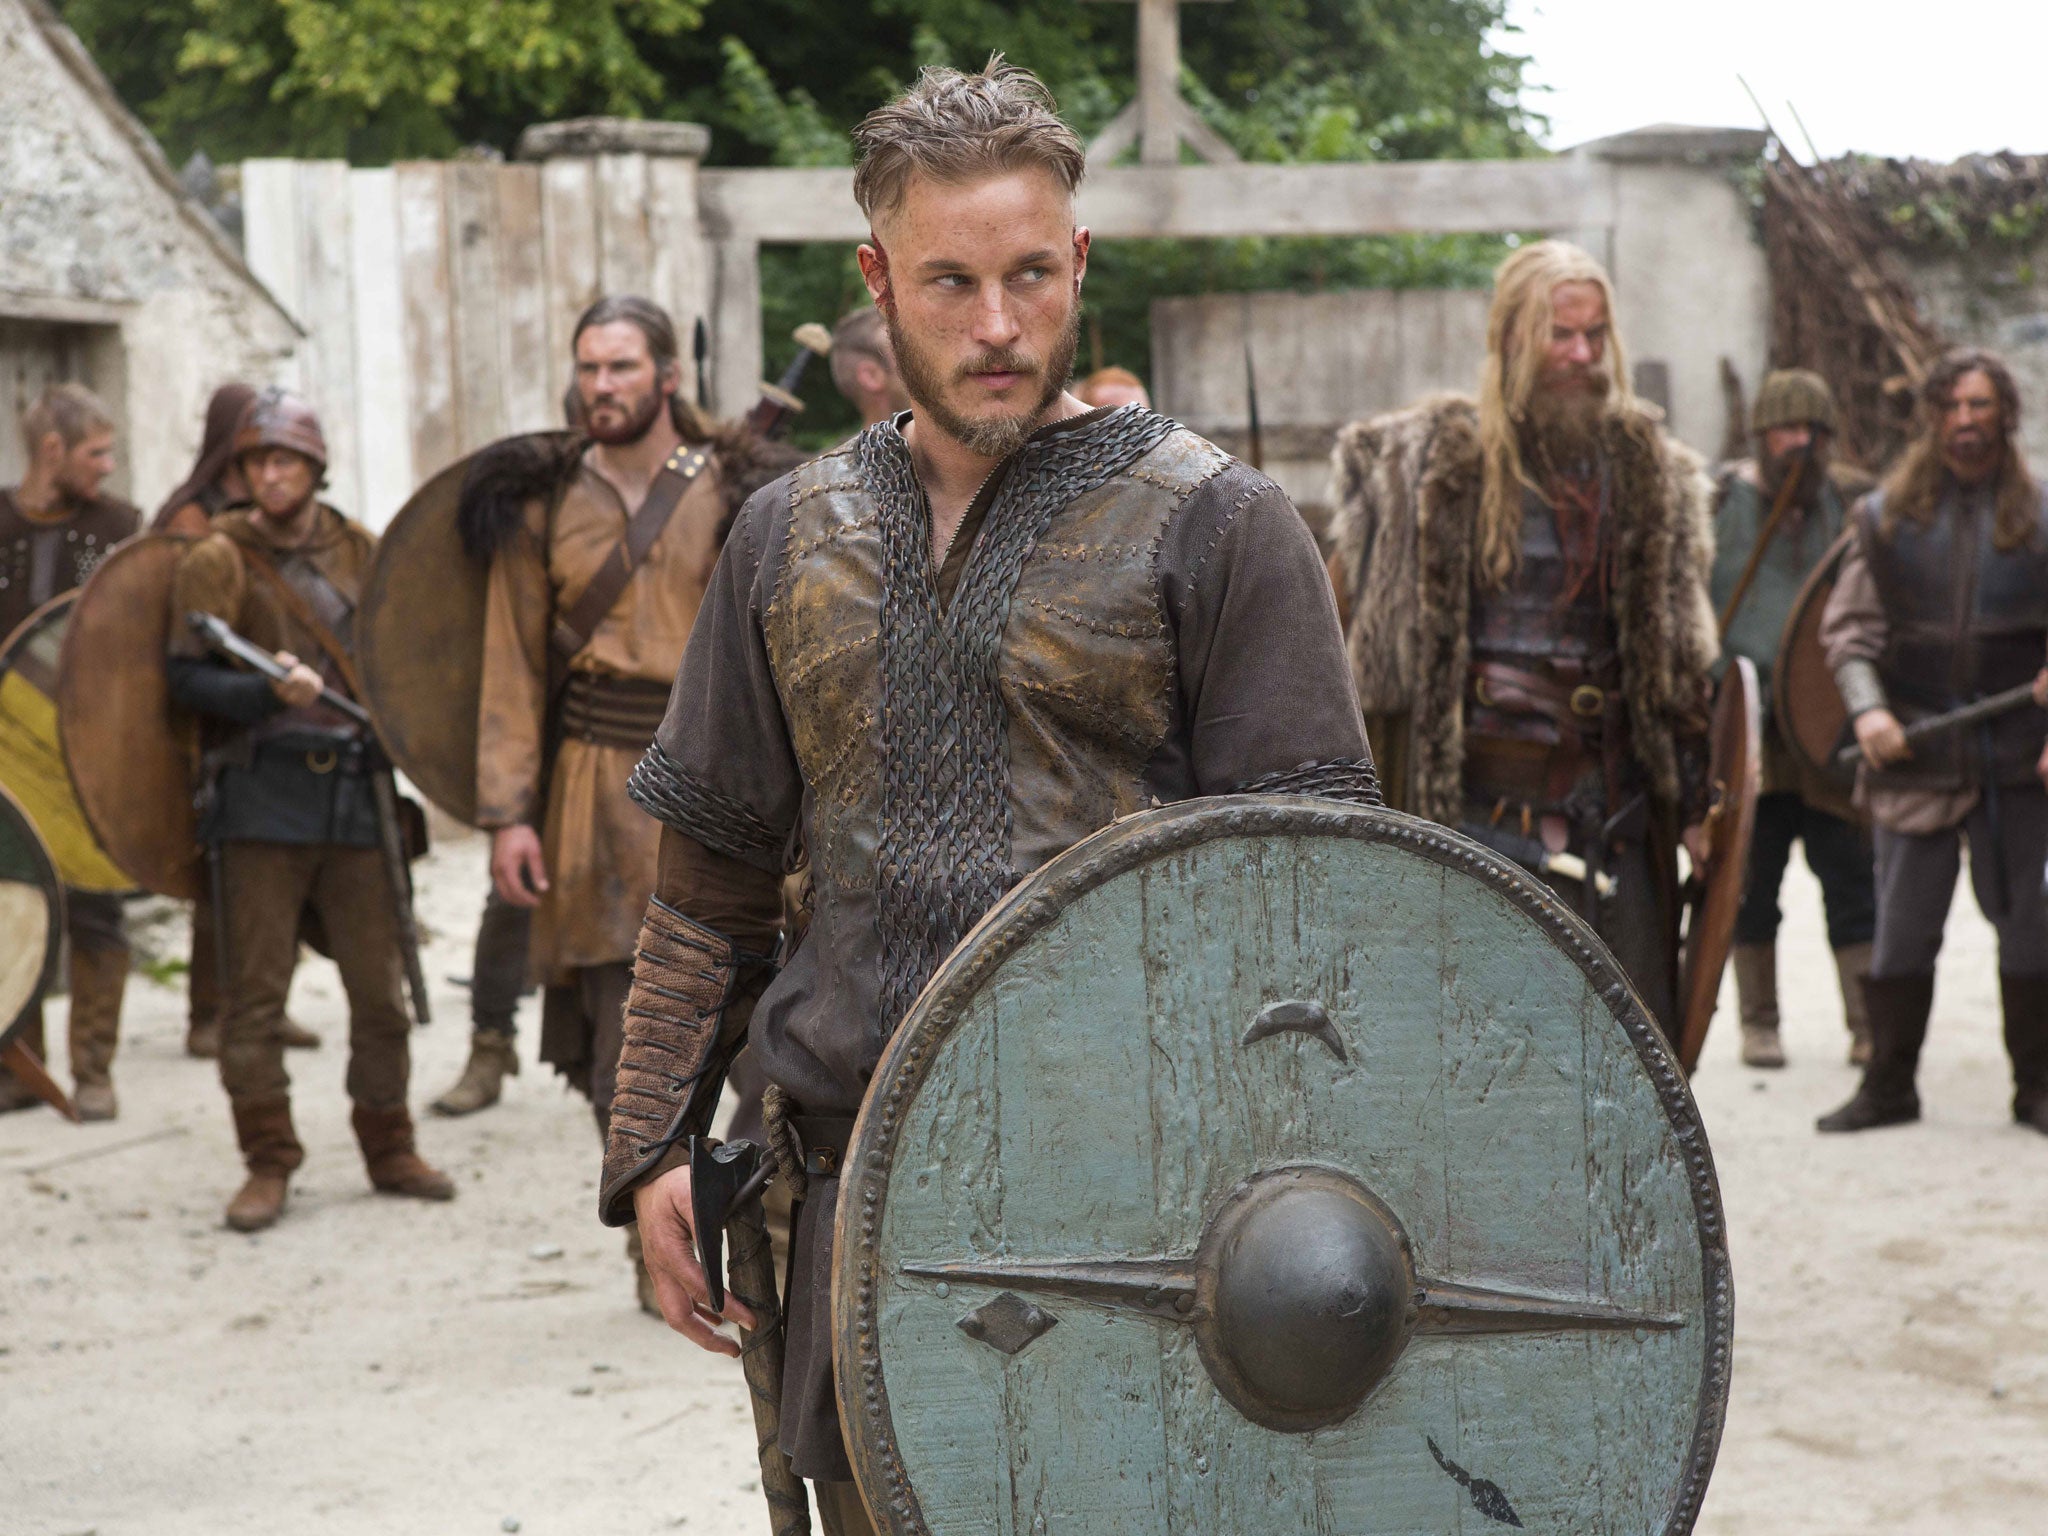 Travis Fimmel plays Ragnar Lothbrook, a man looking to discover new worlds to conquer